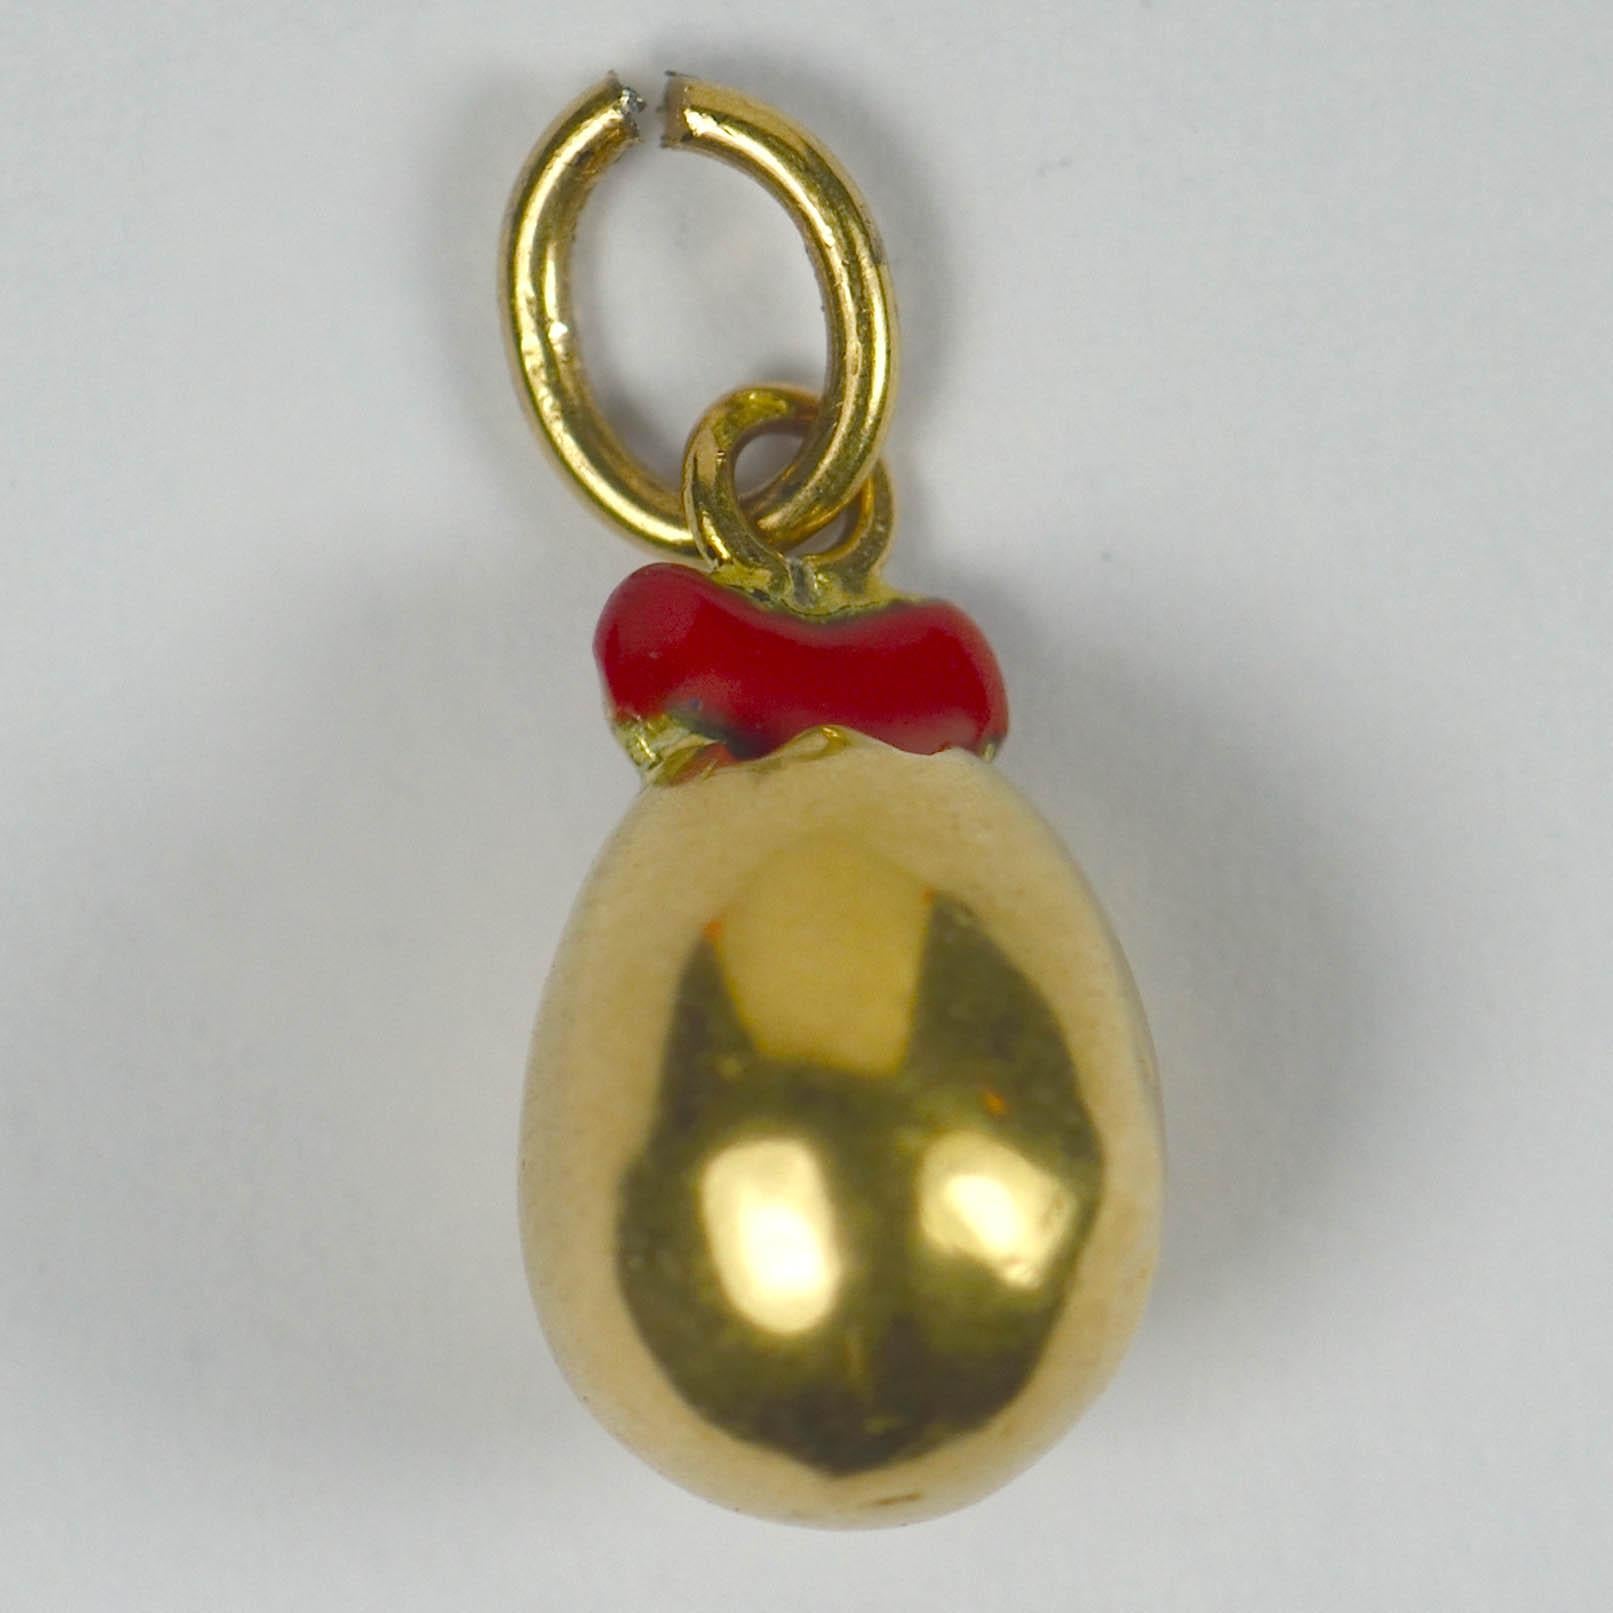 French charm pendant depicting the birth of love as a red enamel heart emerging from a broken 18 karat yellow gold egg. 1/2